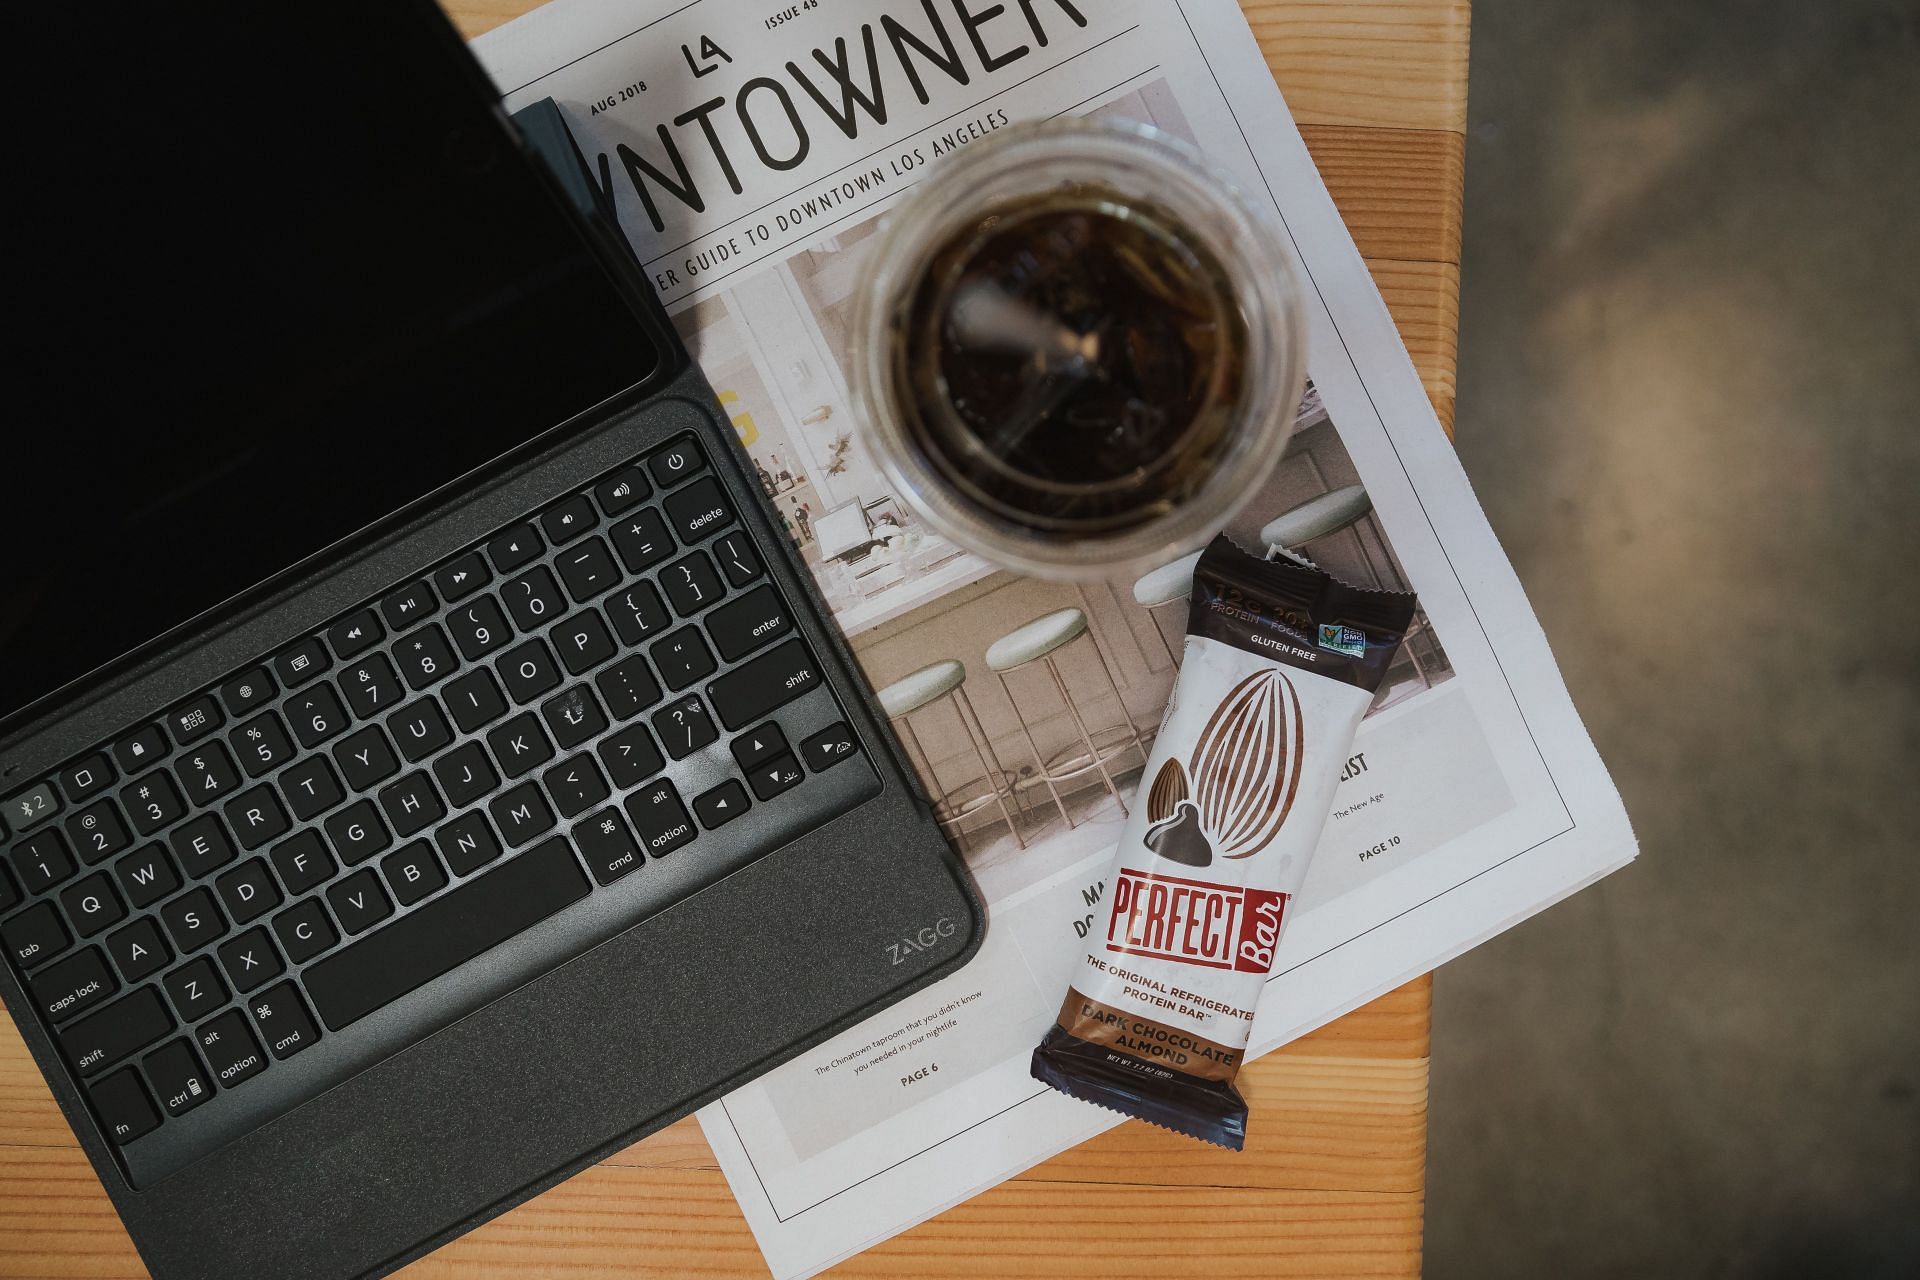 Protein coffee can be made with instant and non-instant proteins. (Image via Unsplash/Perfect snacks)